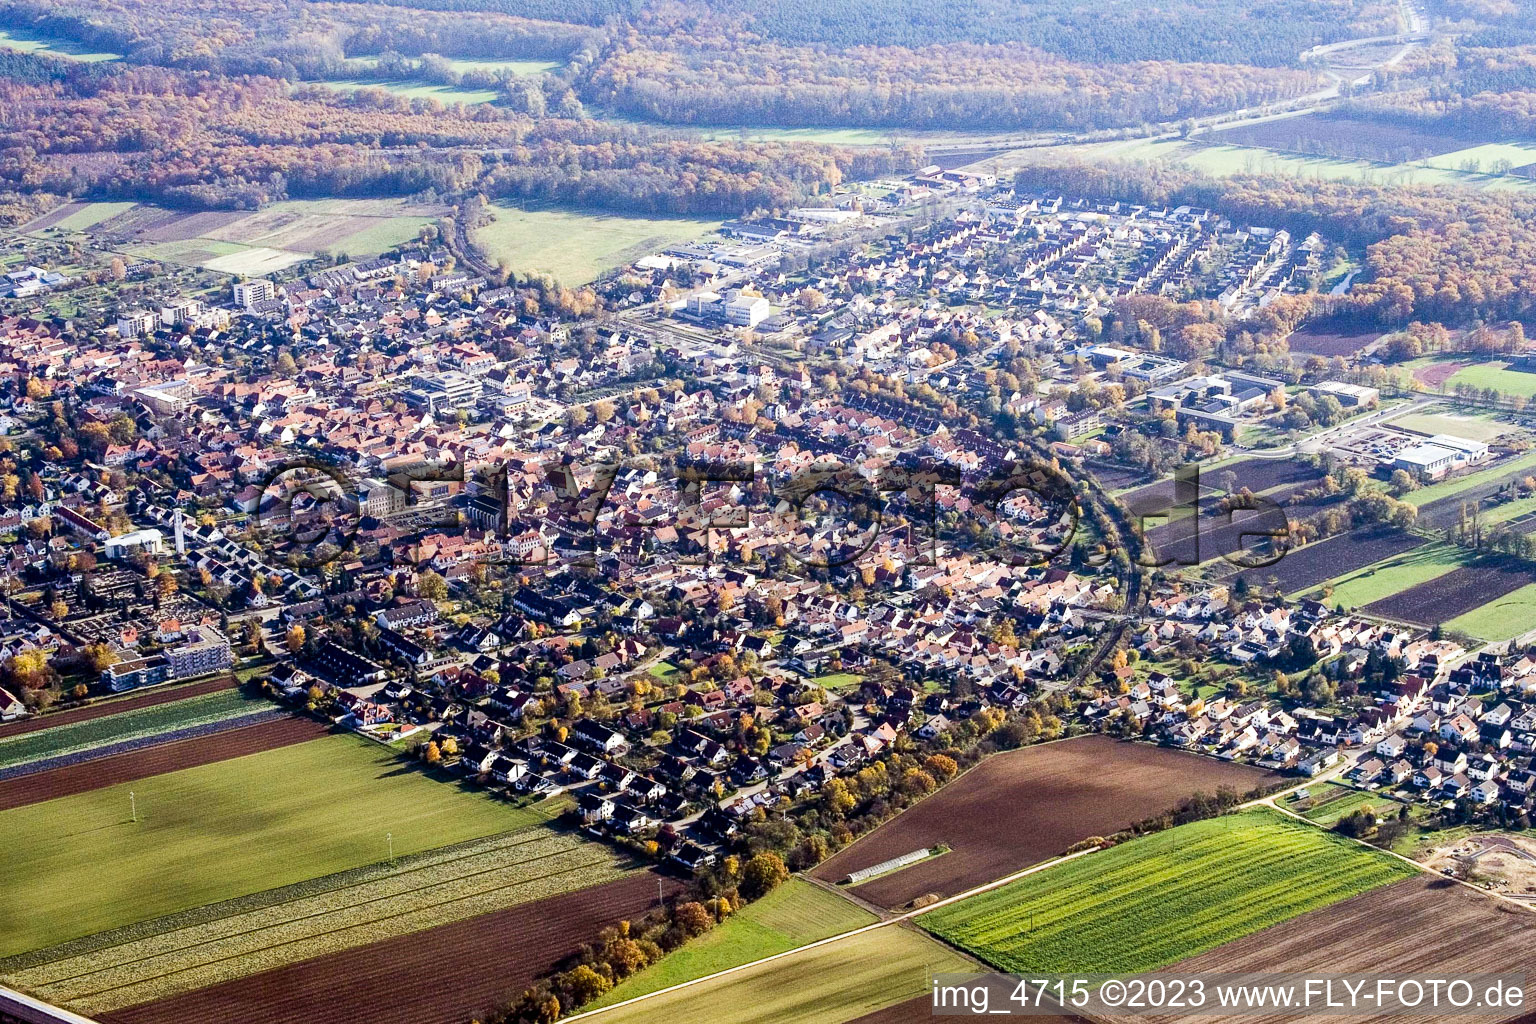 Oblique view of From northwest in Kandel in the state Rhineland-Palatinate, Germany